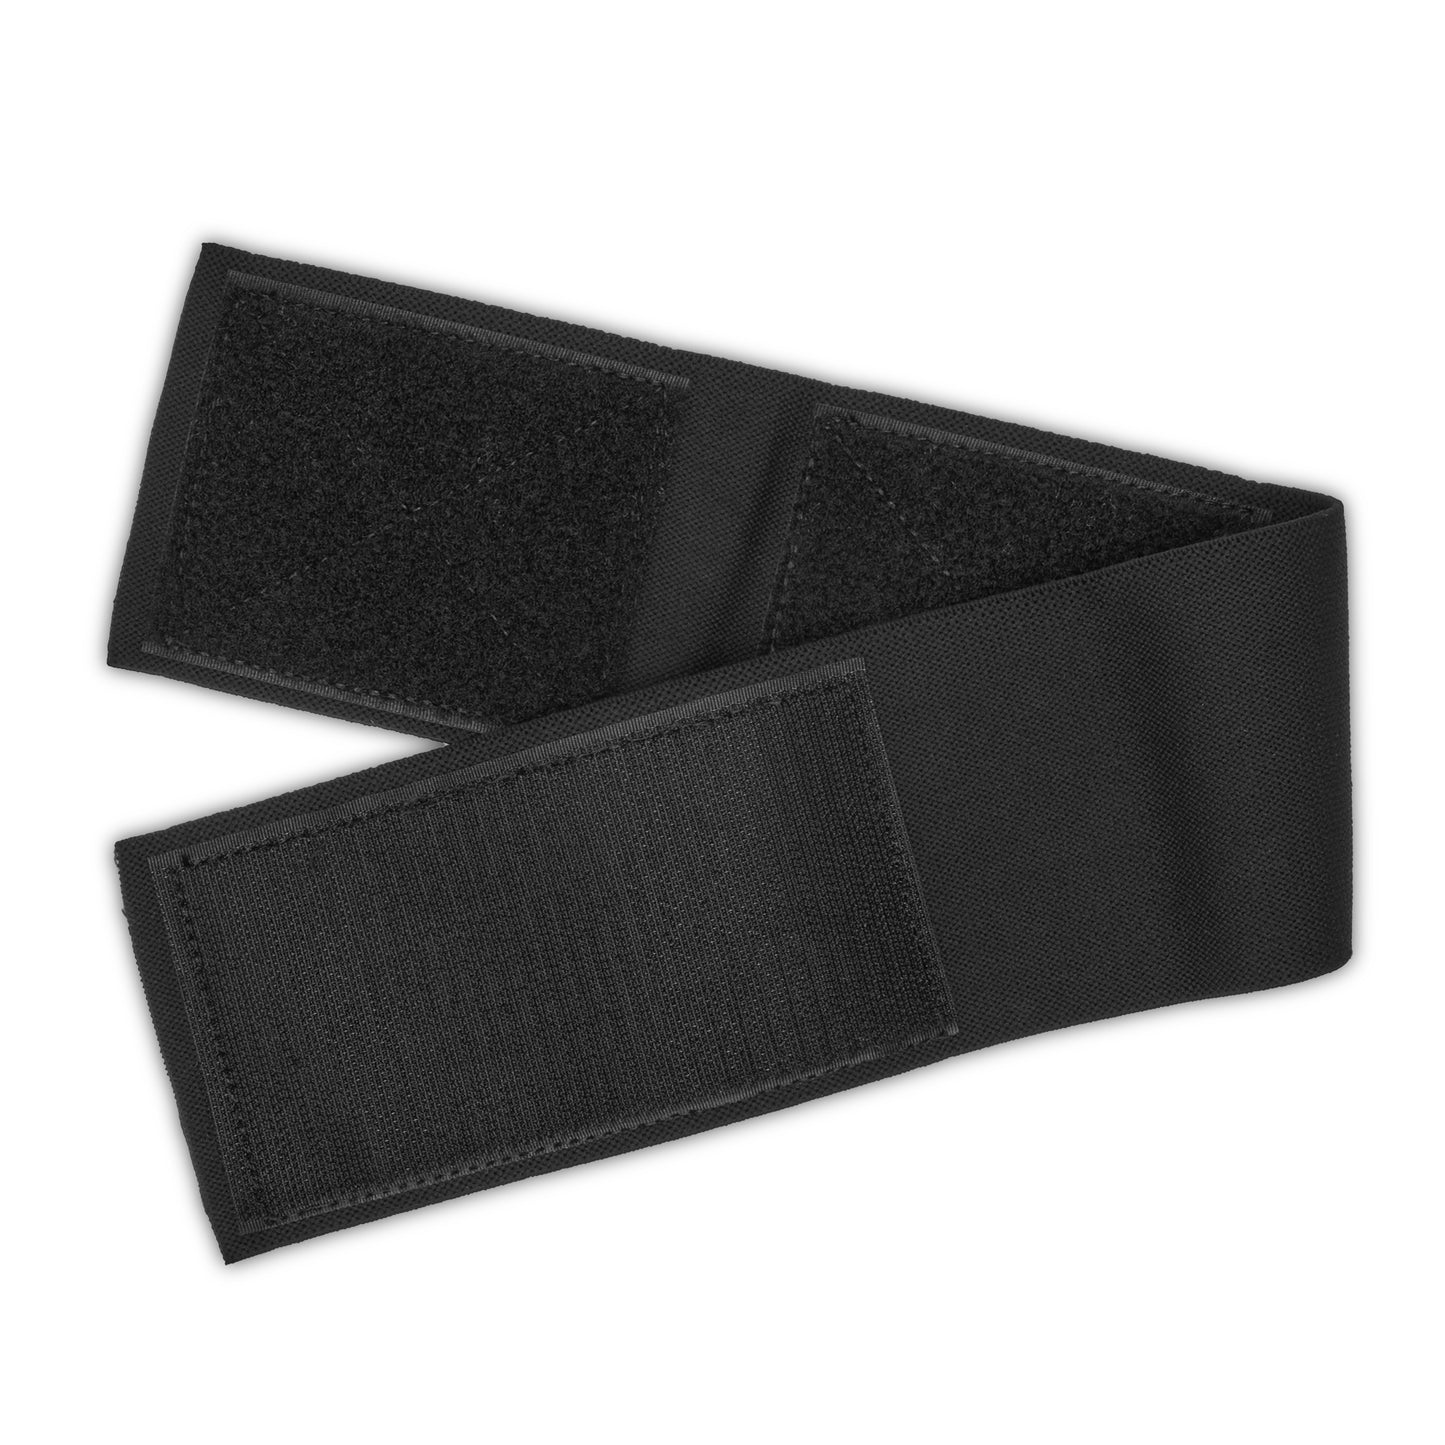 The VNSH black waist belt extender 20 inches folded in half showing both sides with the Velcro tapes